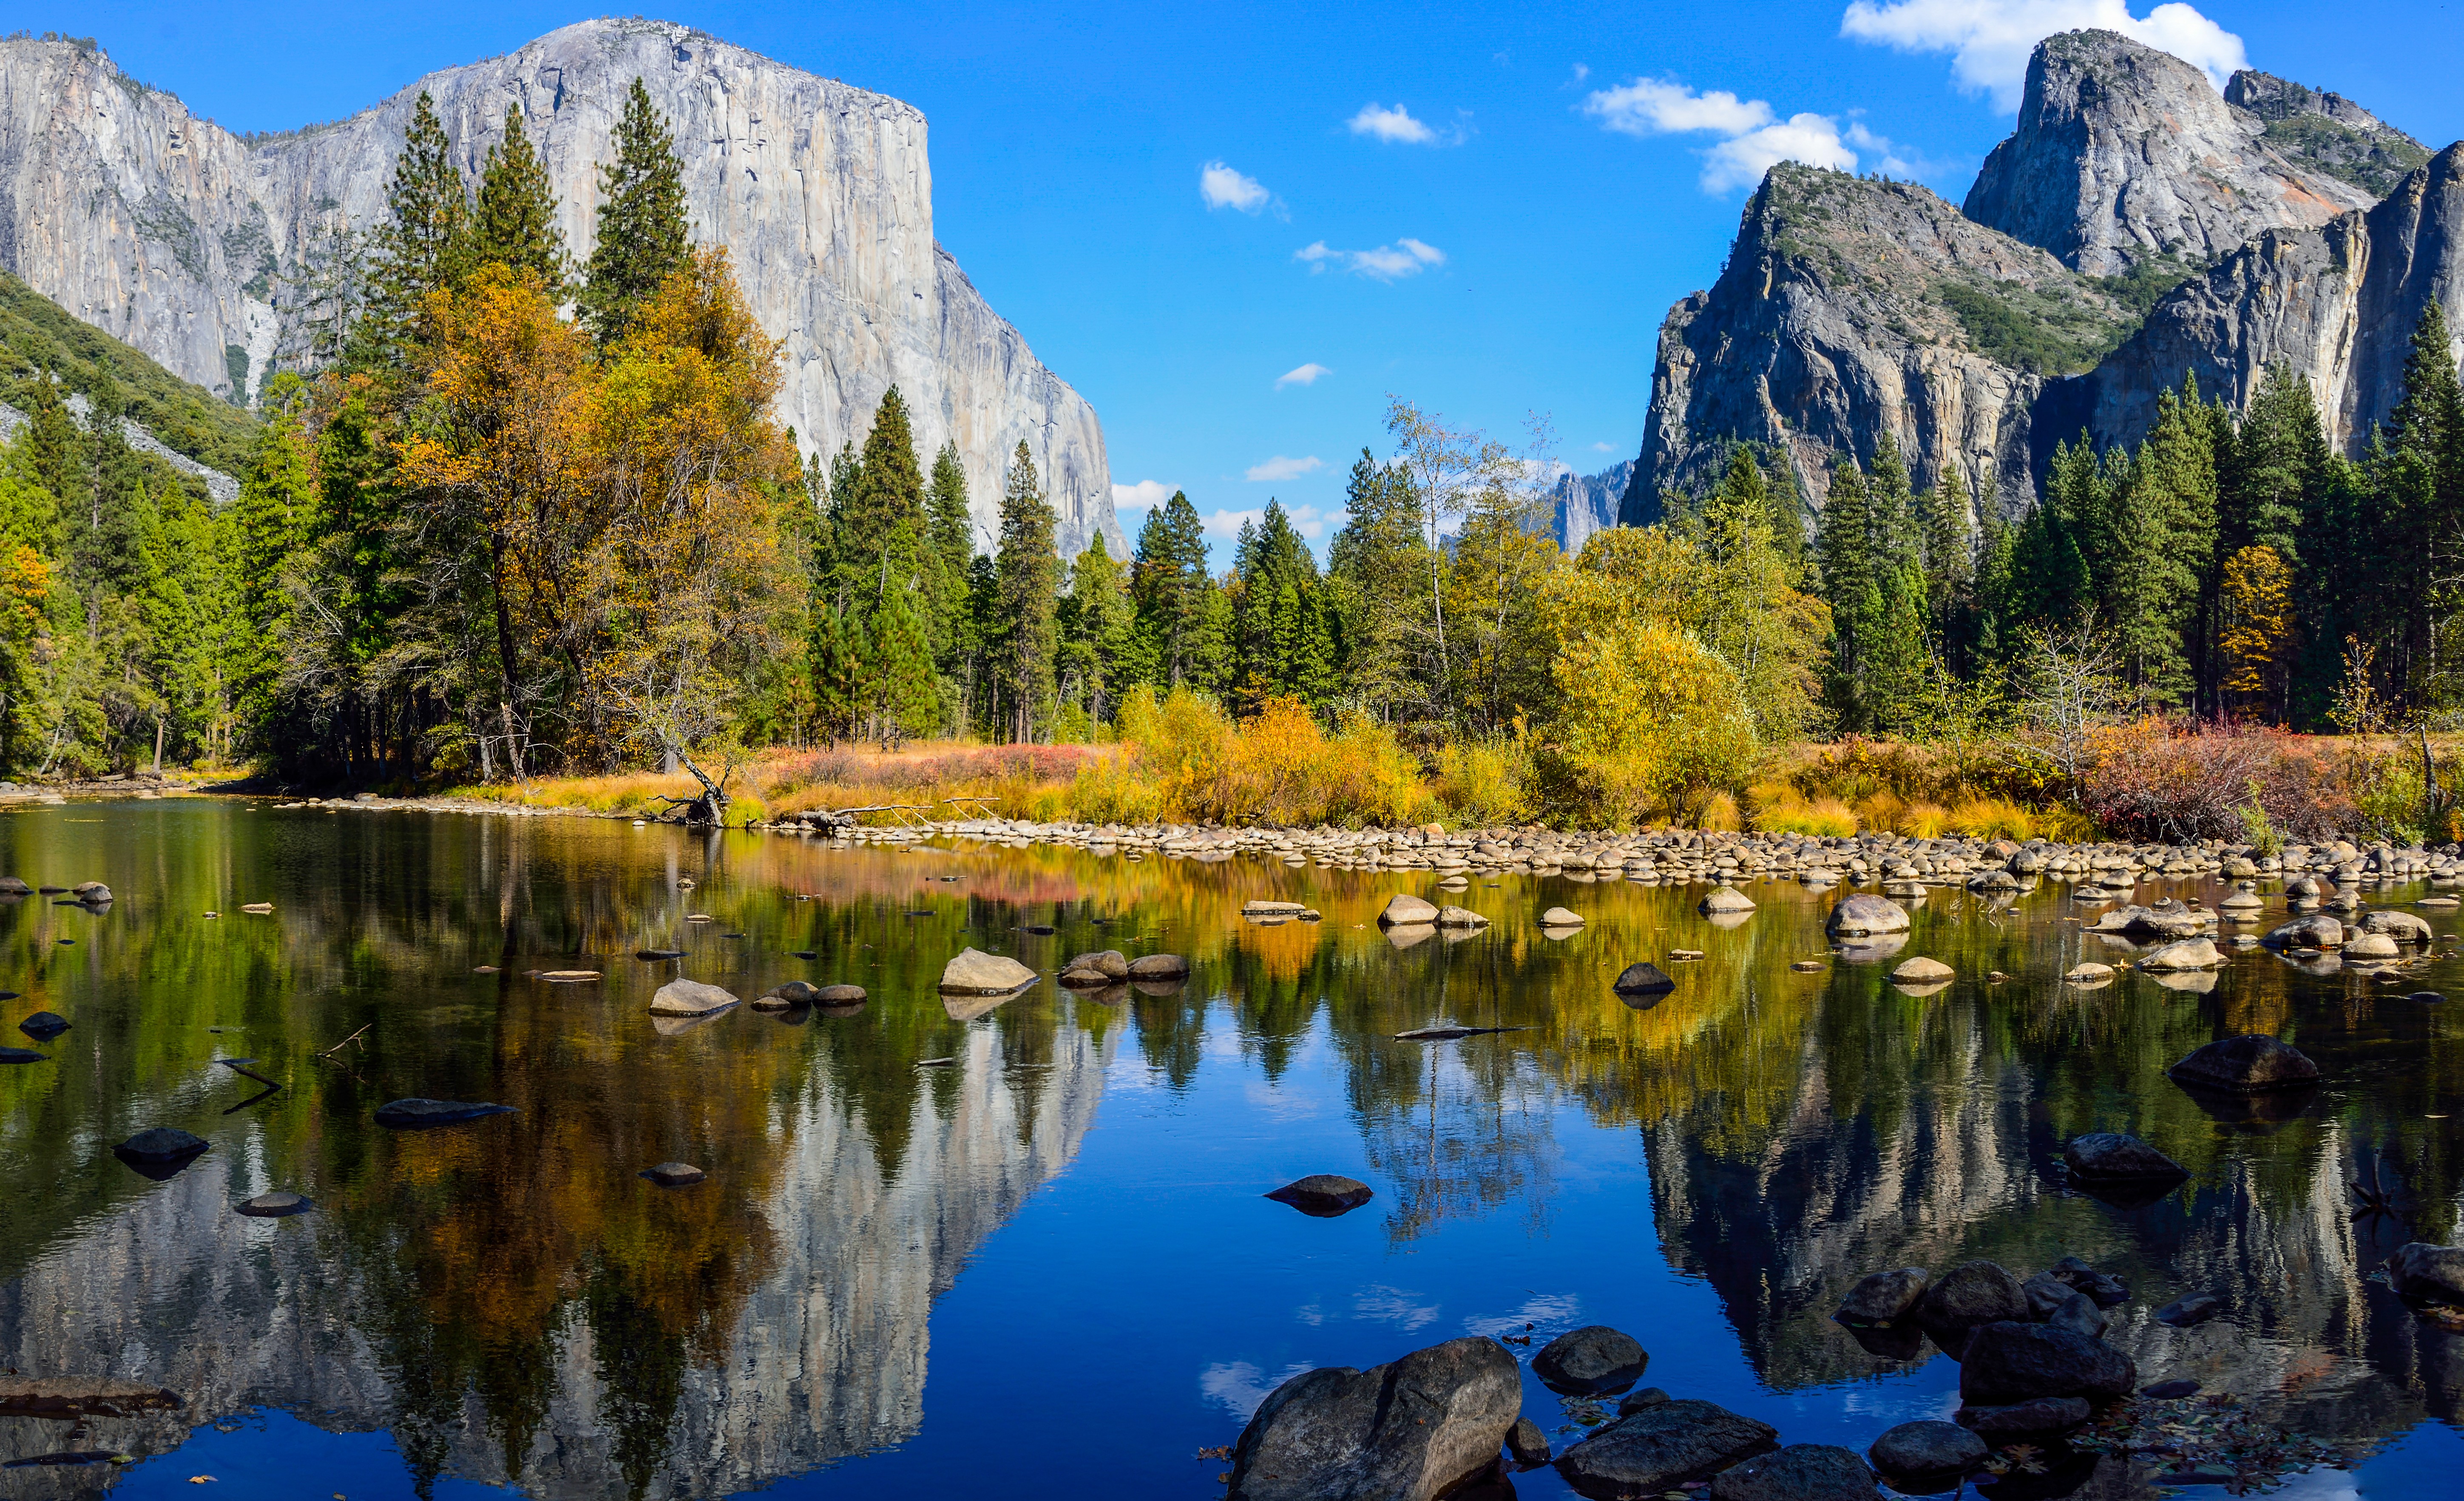 Top 10 Pictures of Yosemite National Park | Backpaco world explorer